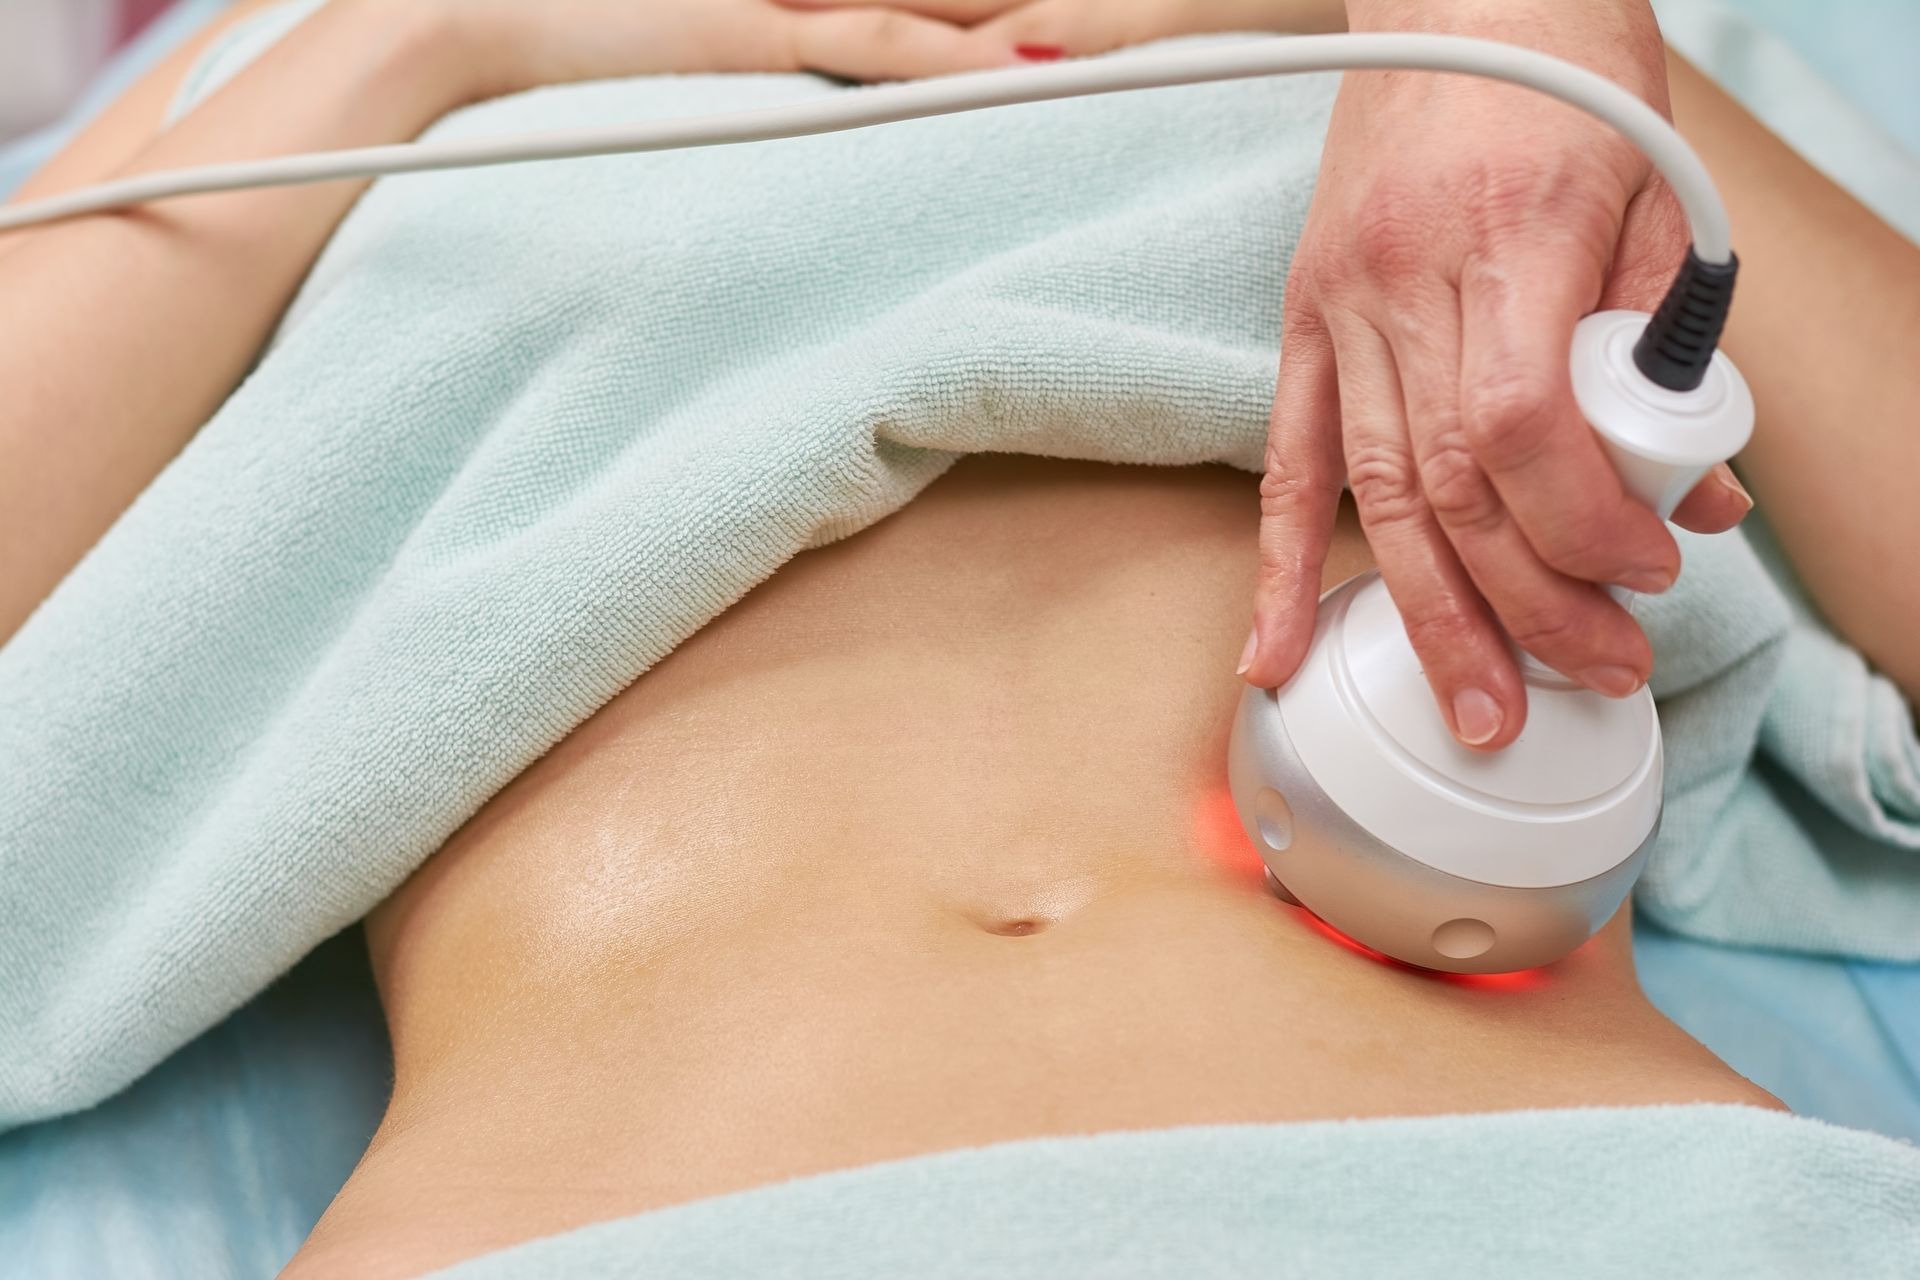 a woman is getting a tummy treatment on her stomach .